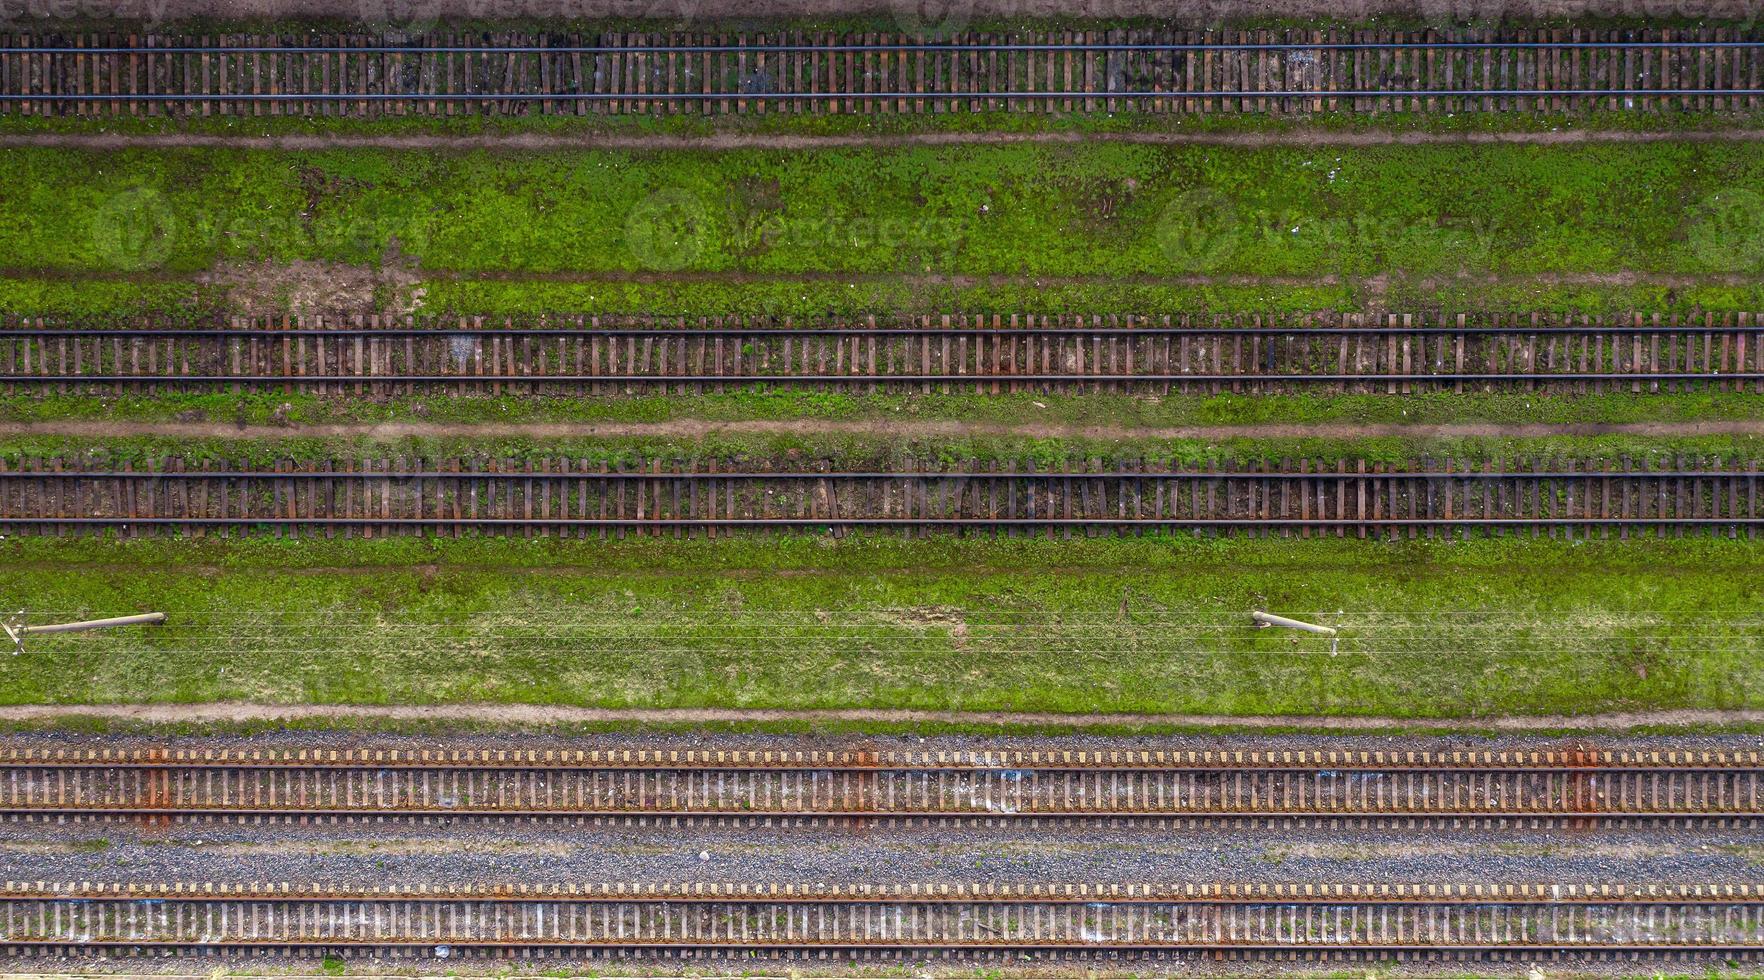 a lot of railway tracks top view from a drone photo